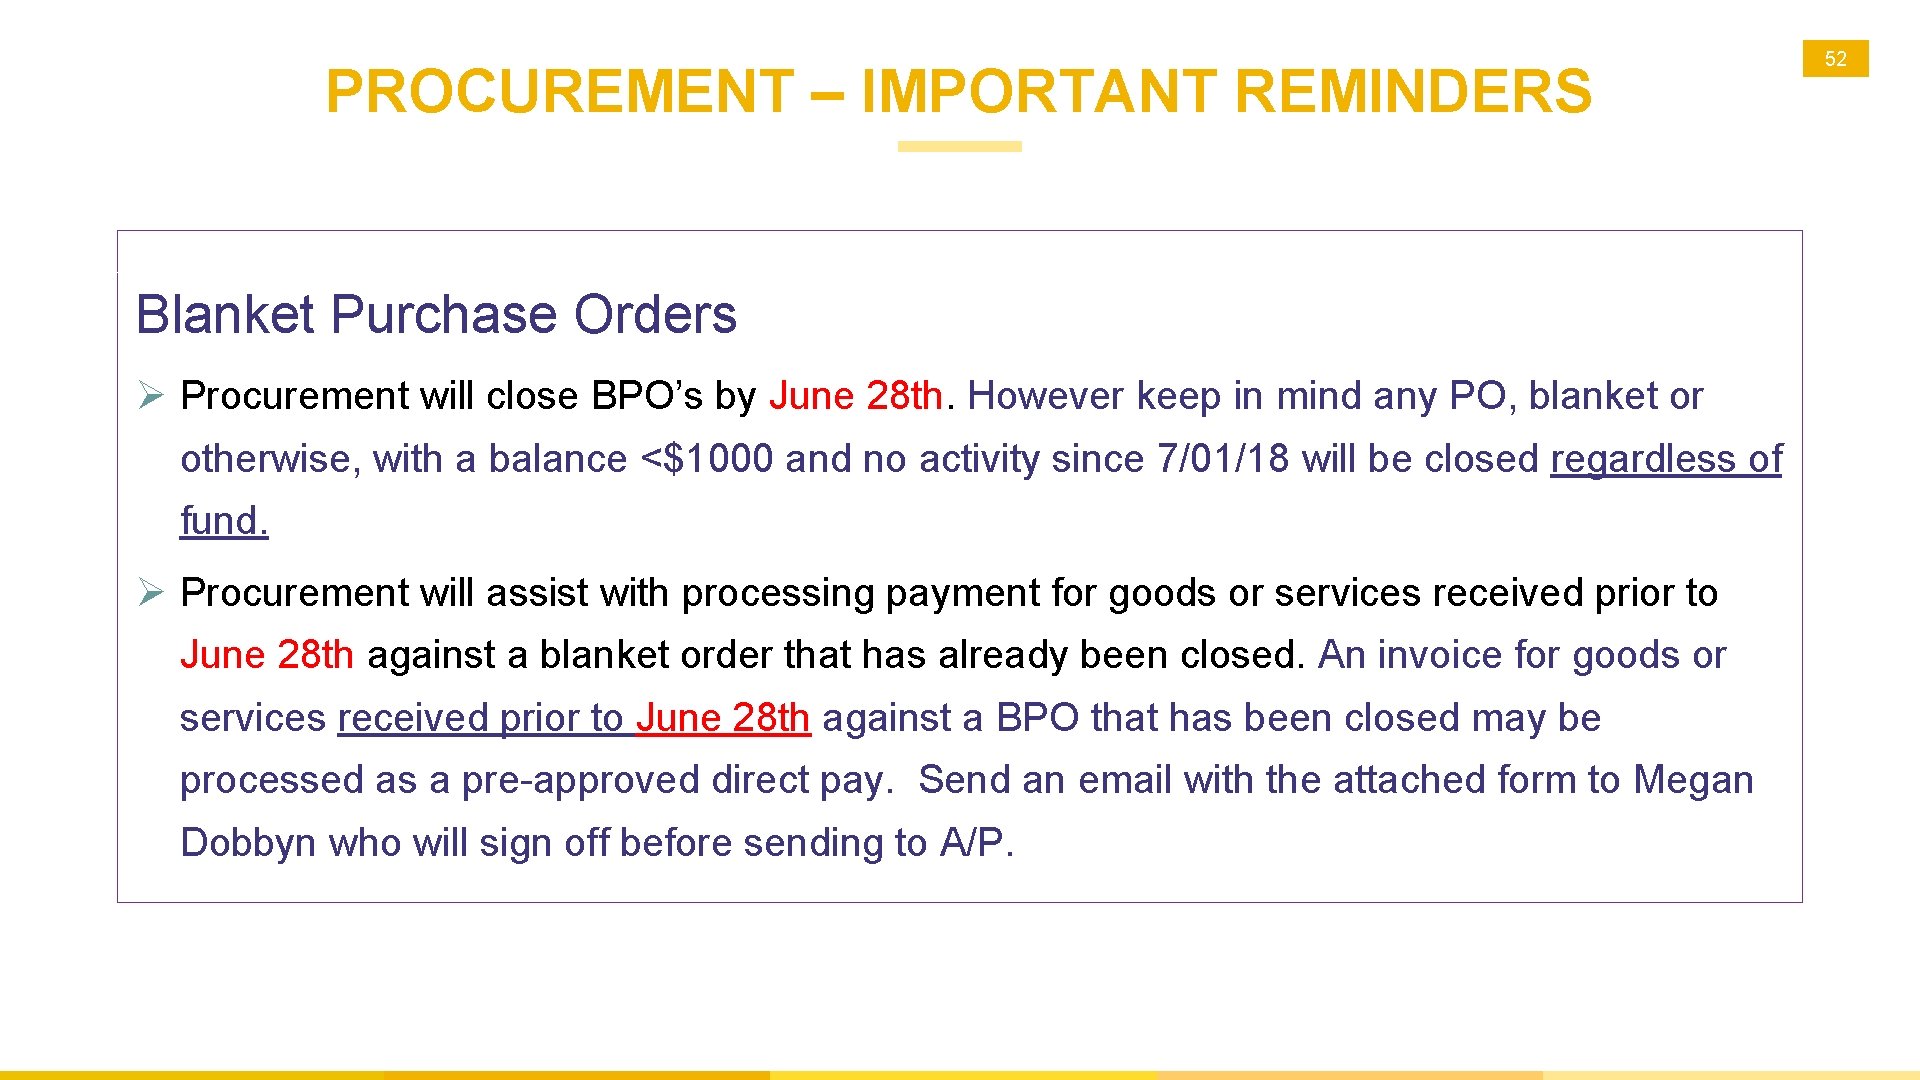 PROCUREMENT – IMPORTANT REMINDERS Blanket Purchase Orders Ø Procurement will close BPO’s by June